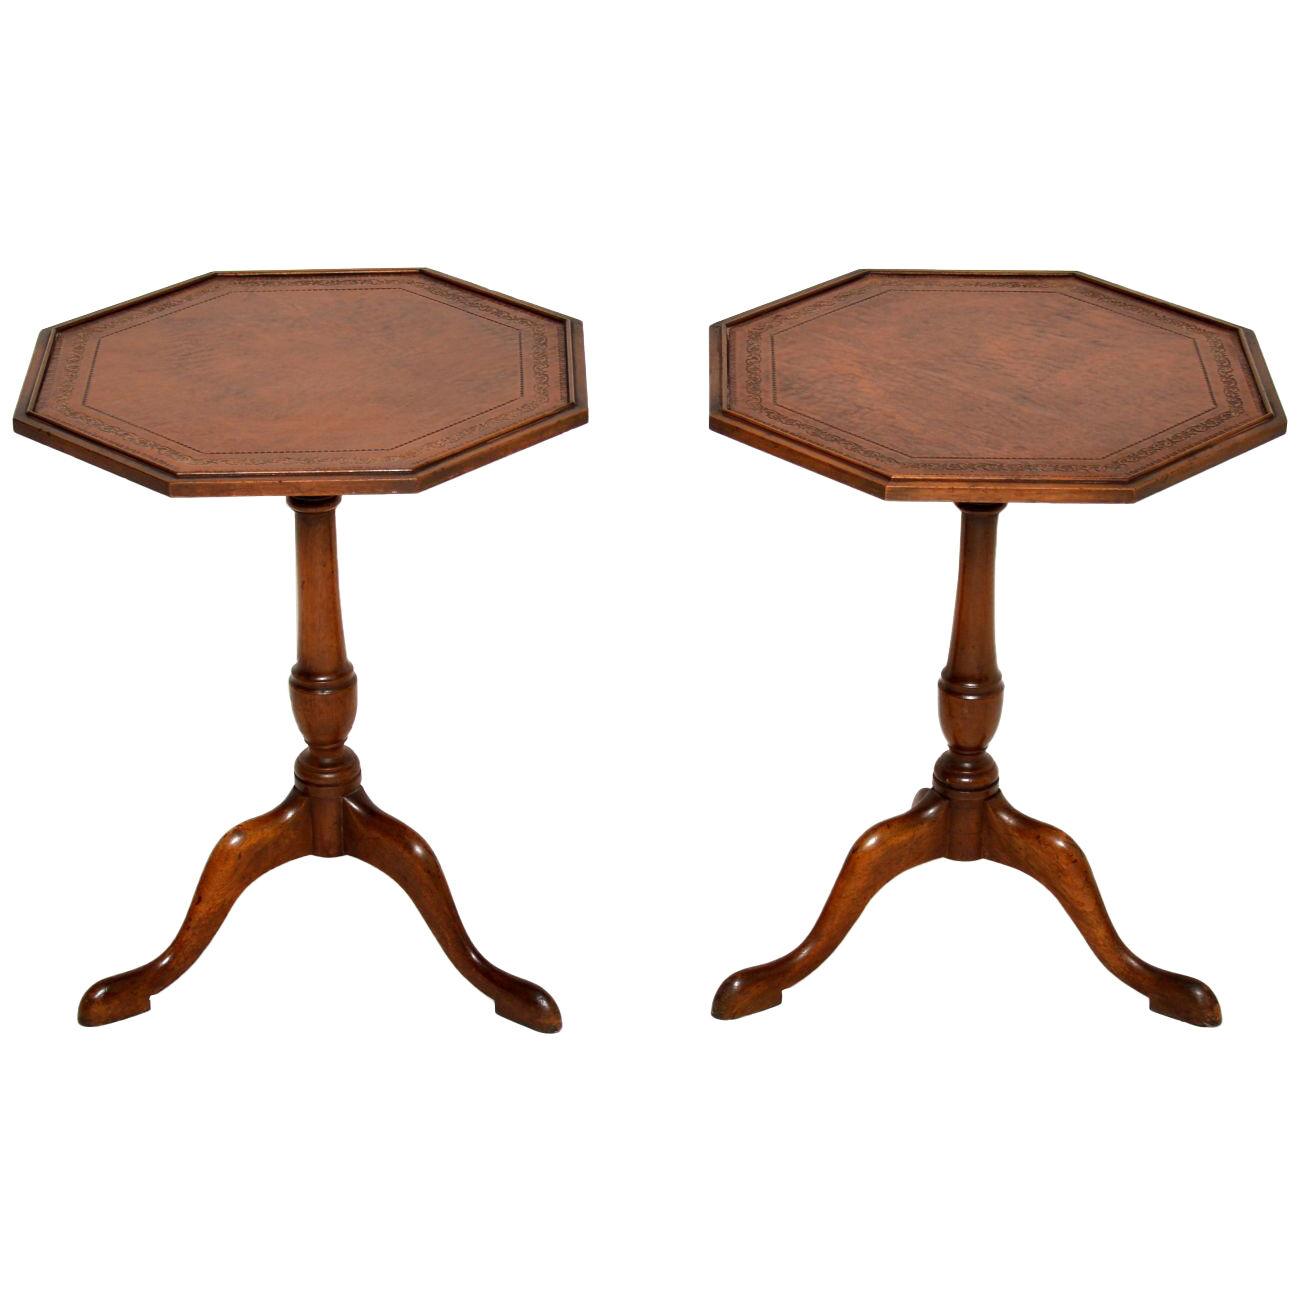 Pair of Antique Mahogany Leather Top Side Tables